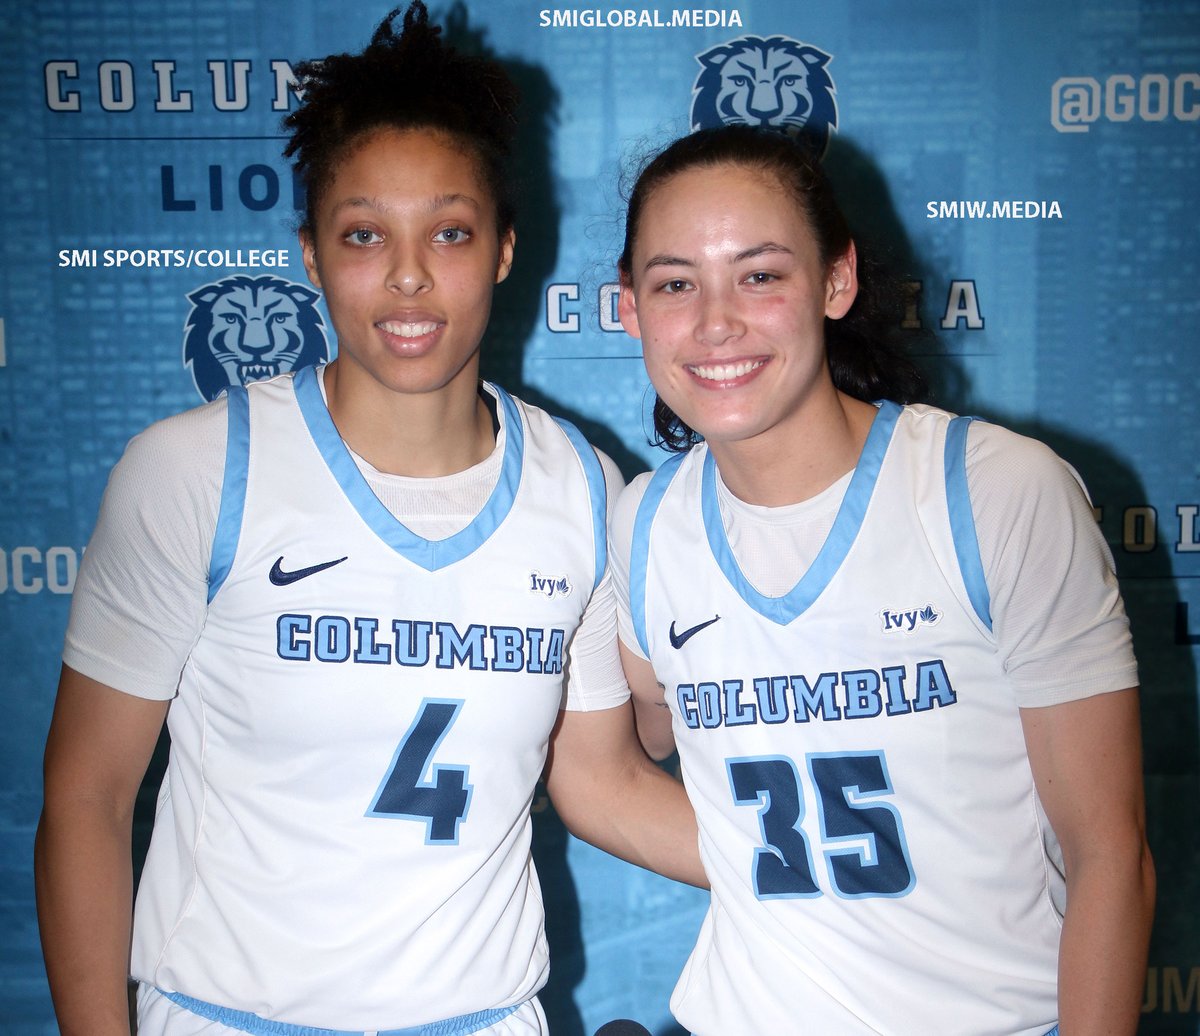 SMI SPORTS UNIVERSITY:Ivy League Columbia's women basketball: Abbey Hsu & Kaitlin Davis have been selected in 2024 WNBA draft.Abbey Hsu '24CC' was selected by Connecticut Sun & Kaitlyn Davis 23CC by New York Liberty in historic achievement for Columbia #WNBAdraft2024 #LionsRoar